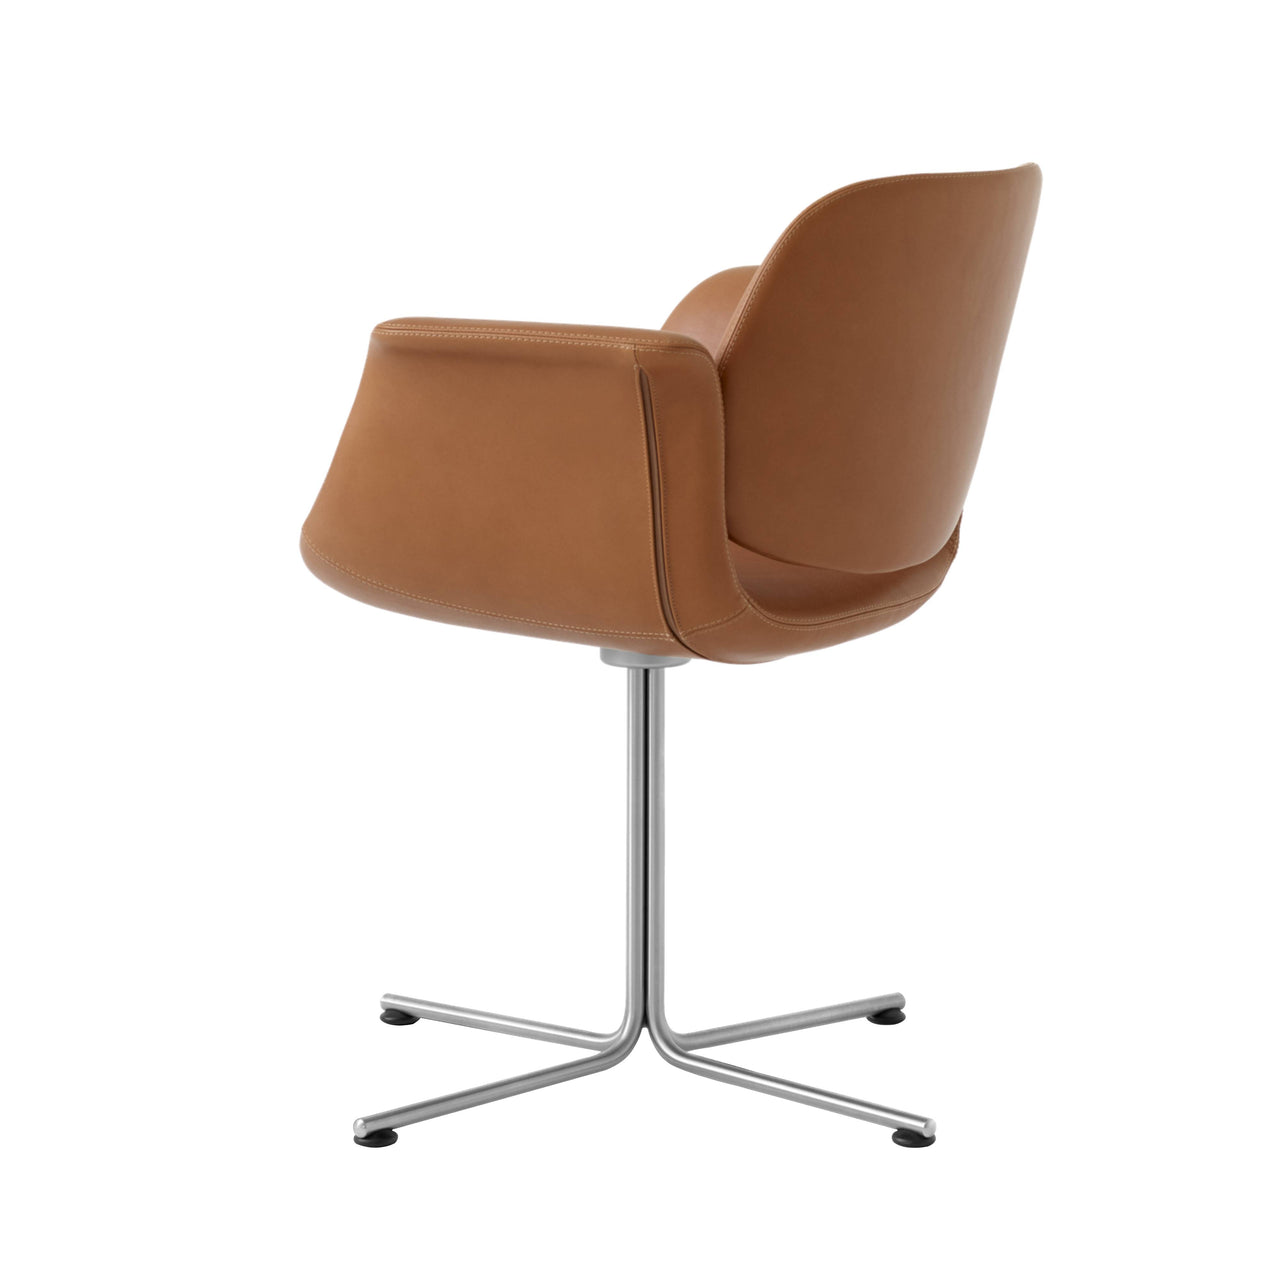 Flamingo Chair: Brushed Stainless Steel + Swivel